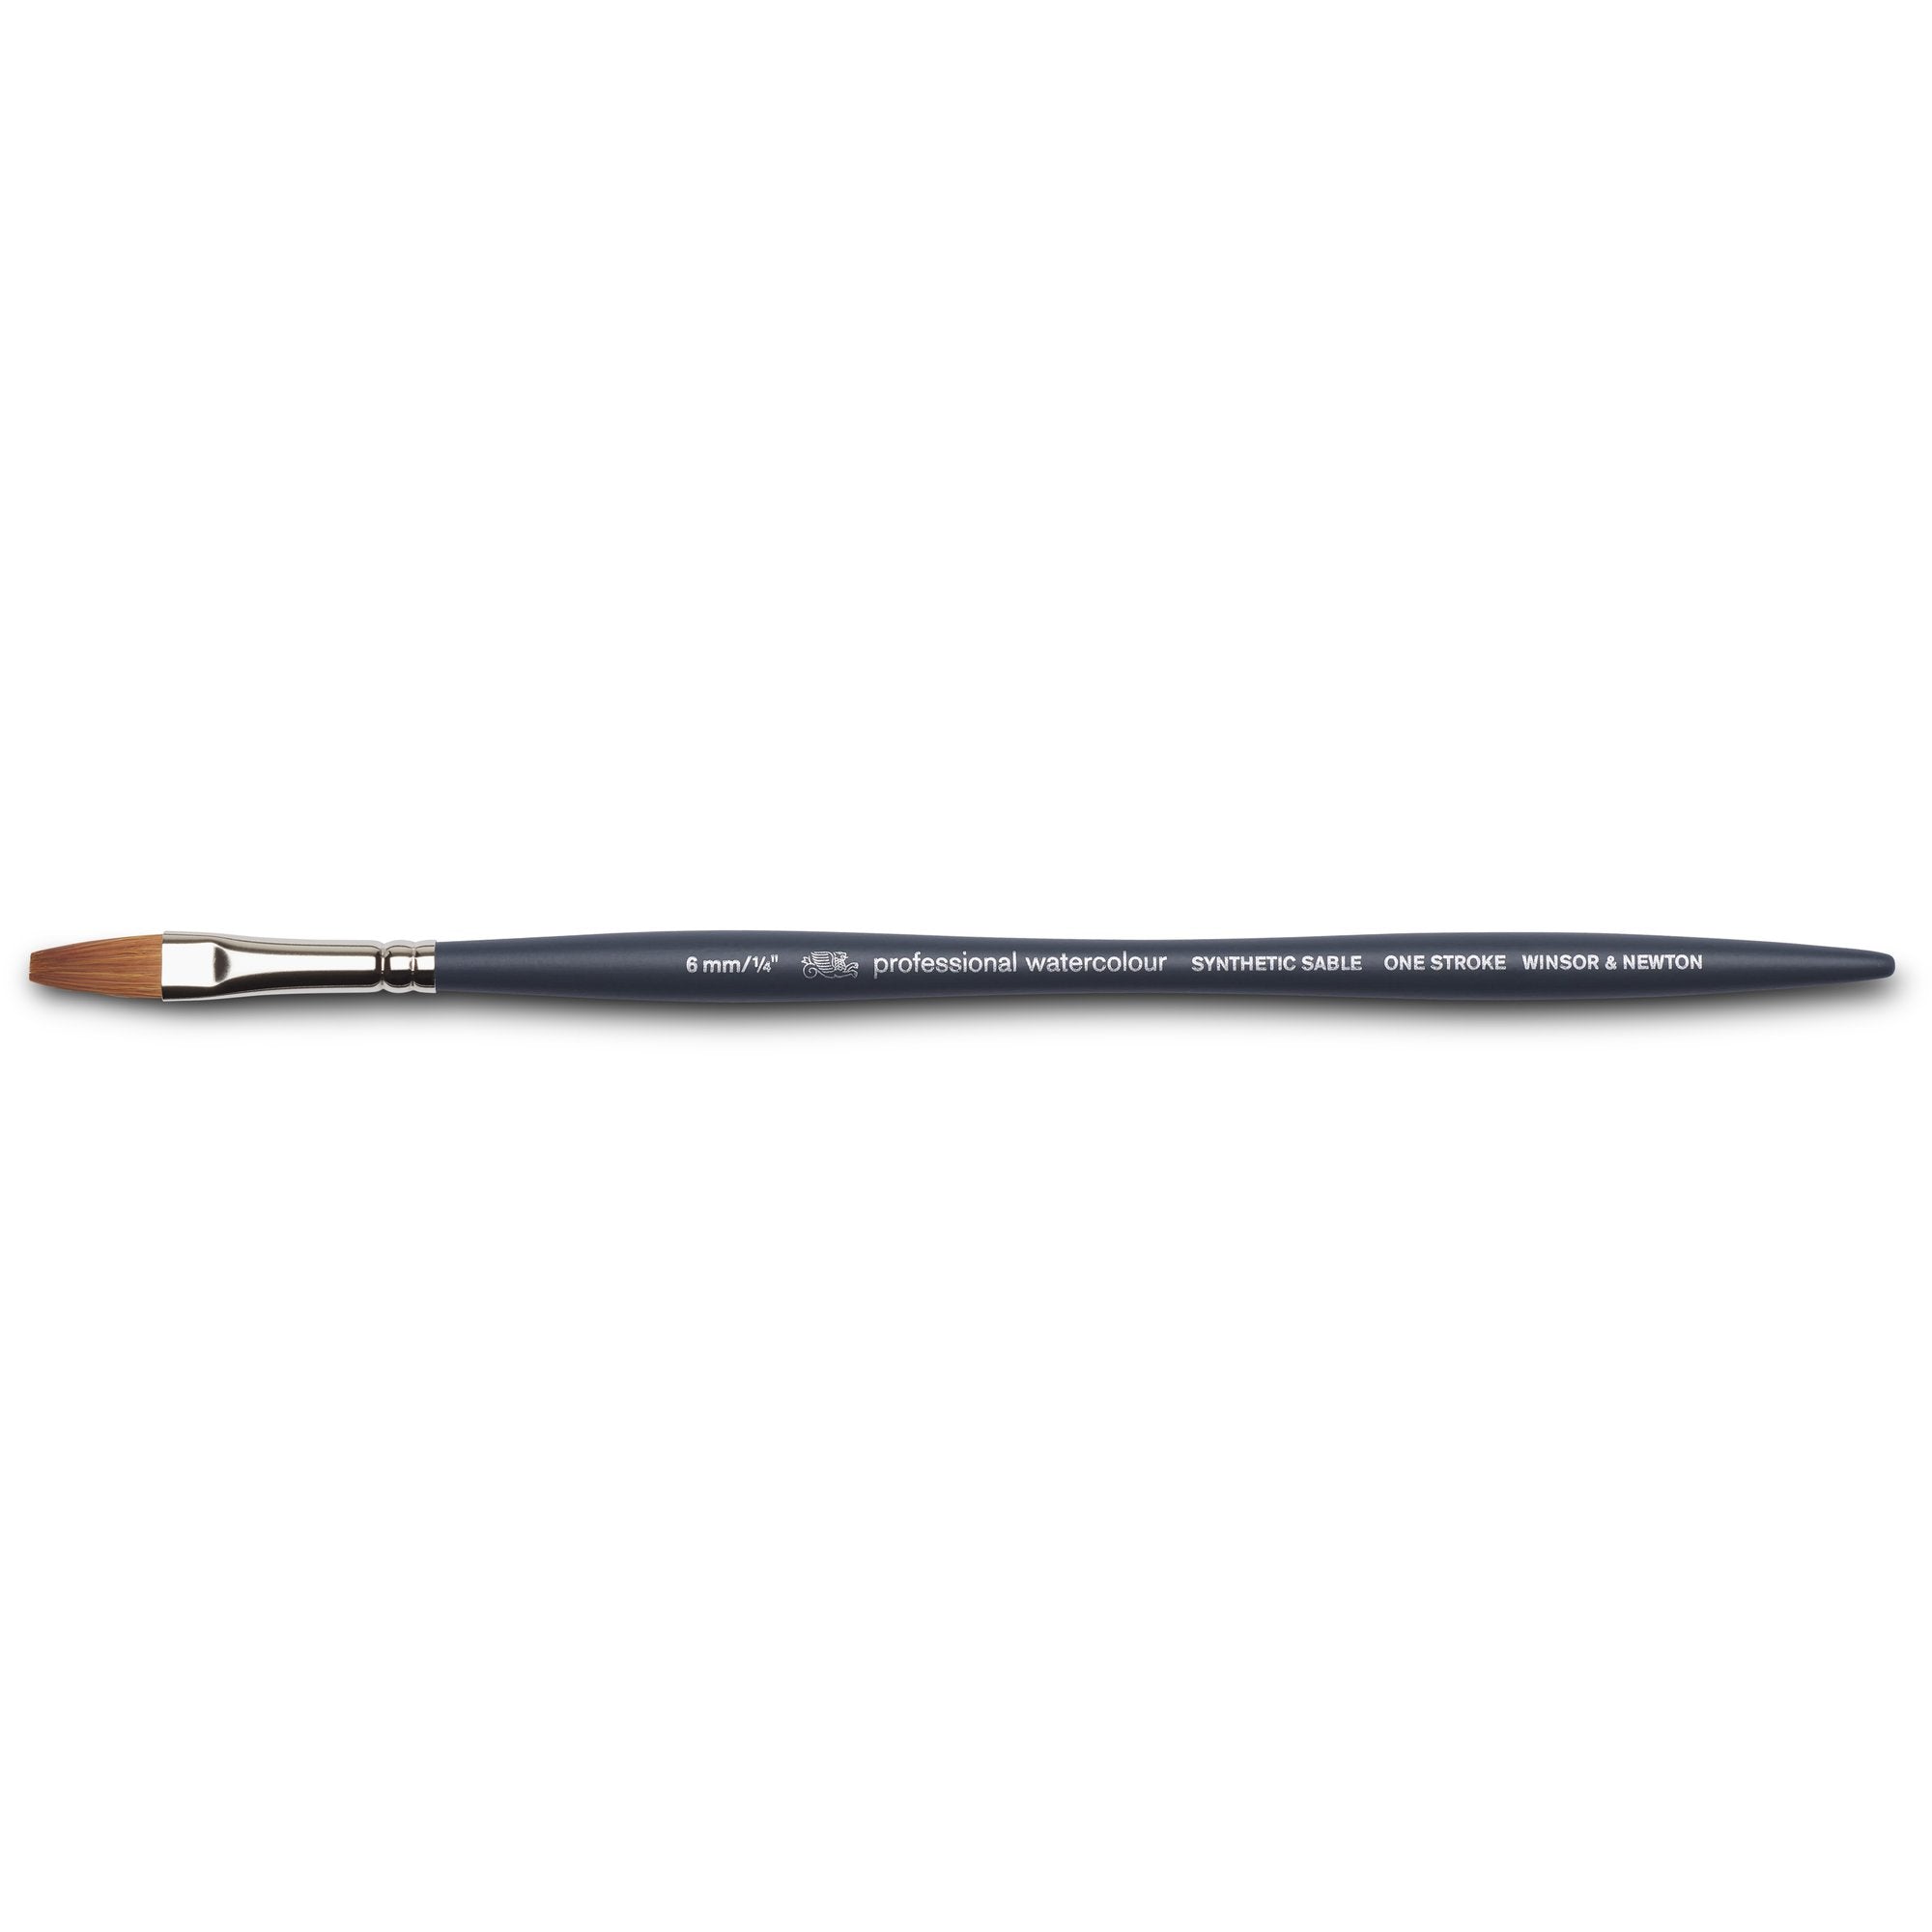 Winsor & Newton Professional Watercolour Synthetic Sable Brush one stroke 1/4 Inch